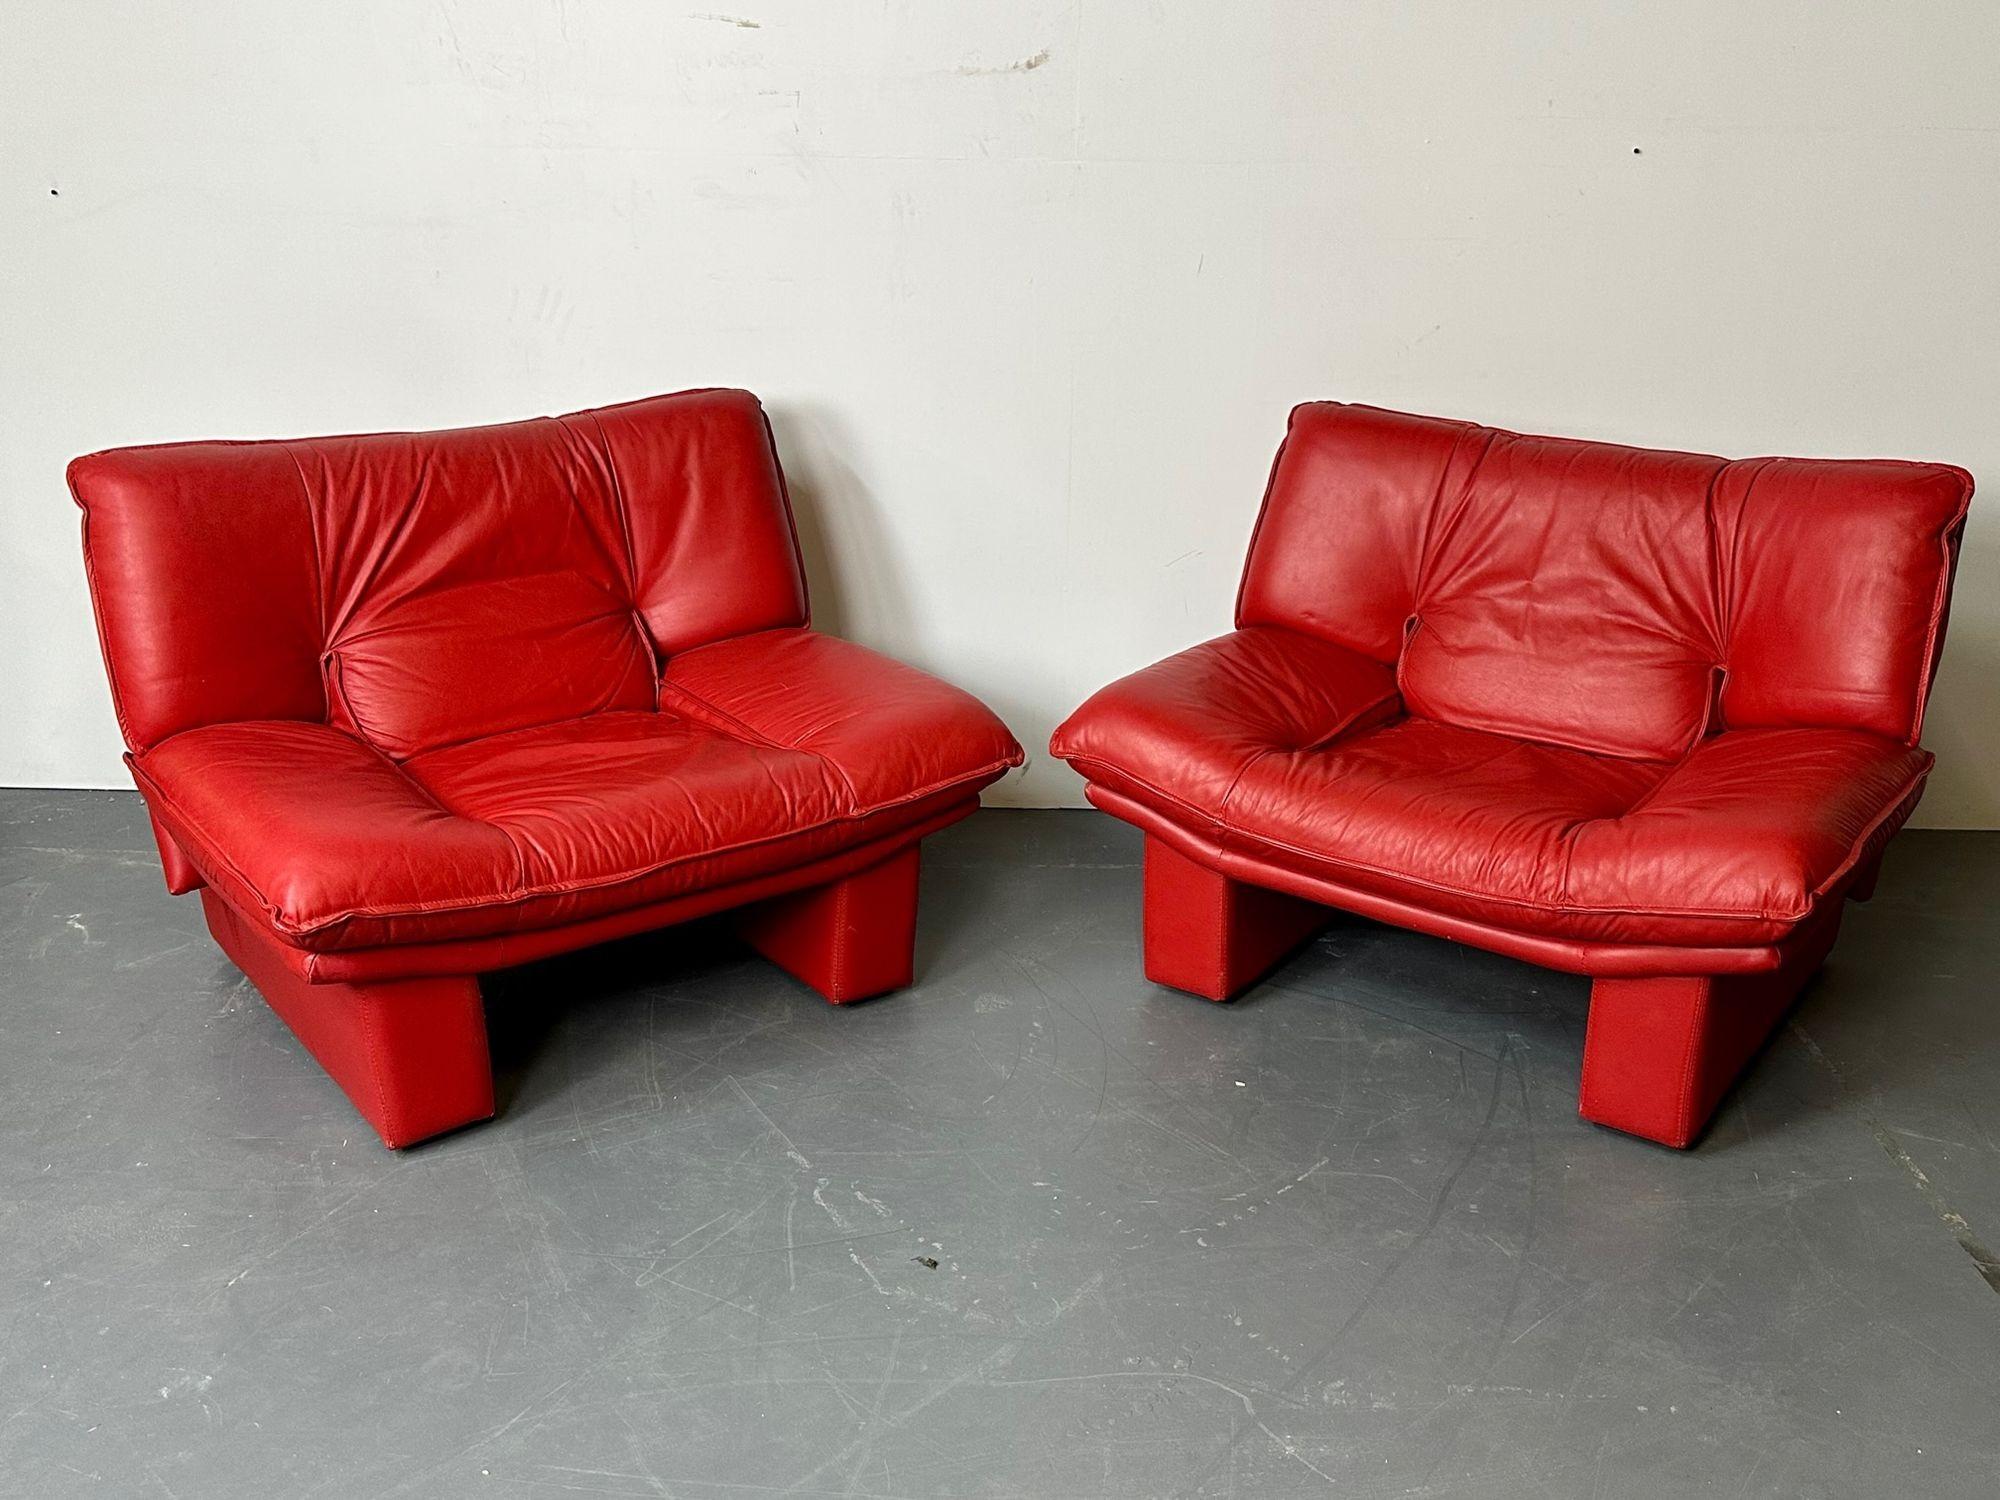 Italian Modern Leather Pair of Arm, Lounge Chairs, Bitonto, Red Leather. Matching sofa sold separately. 
 
Italian Leather Club Chairs, Living Room Set, Bitonto
 
Modern club chairs made in Italy with fine Italian leather, along with a separately